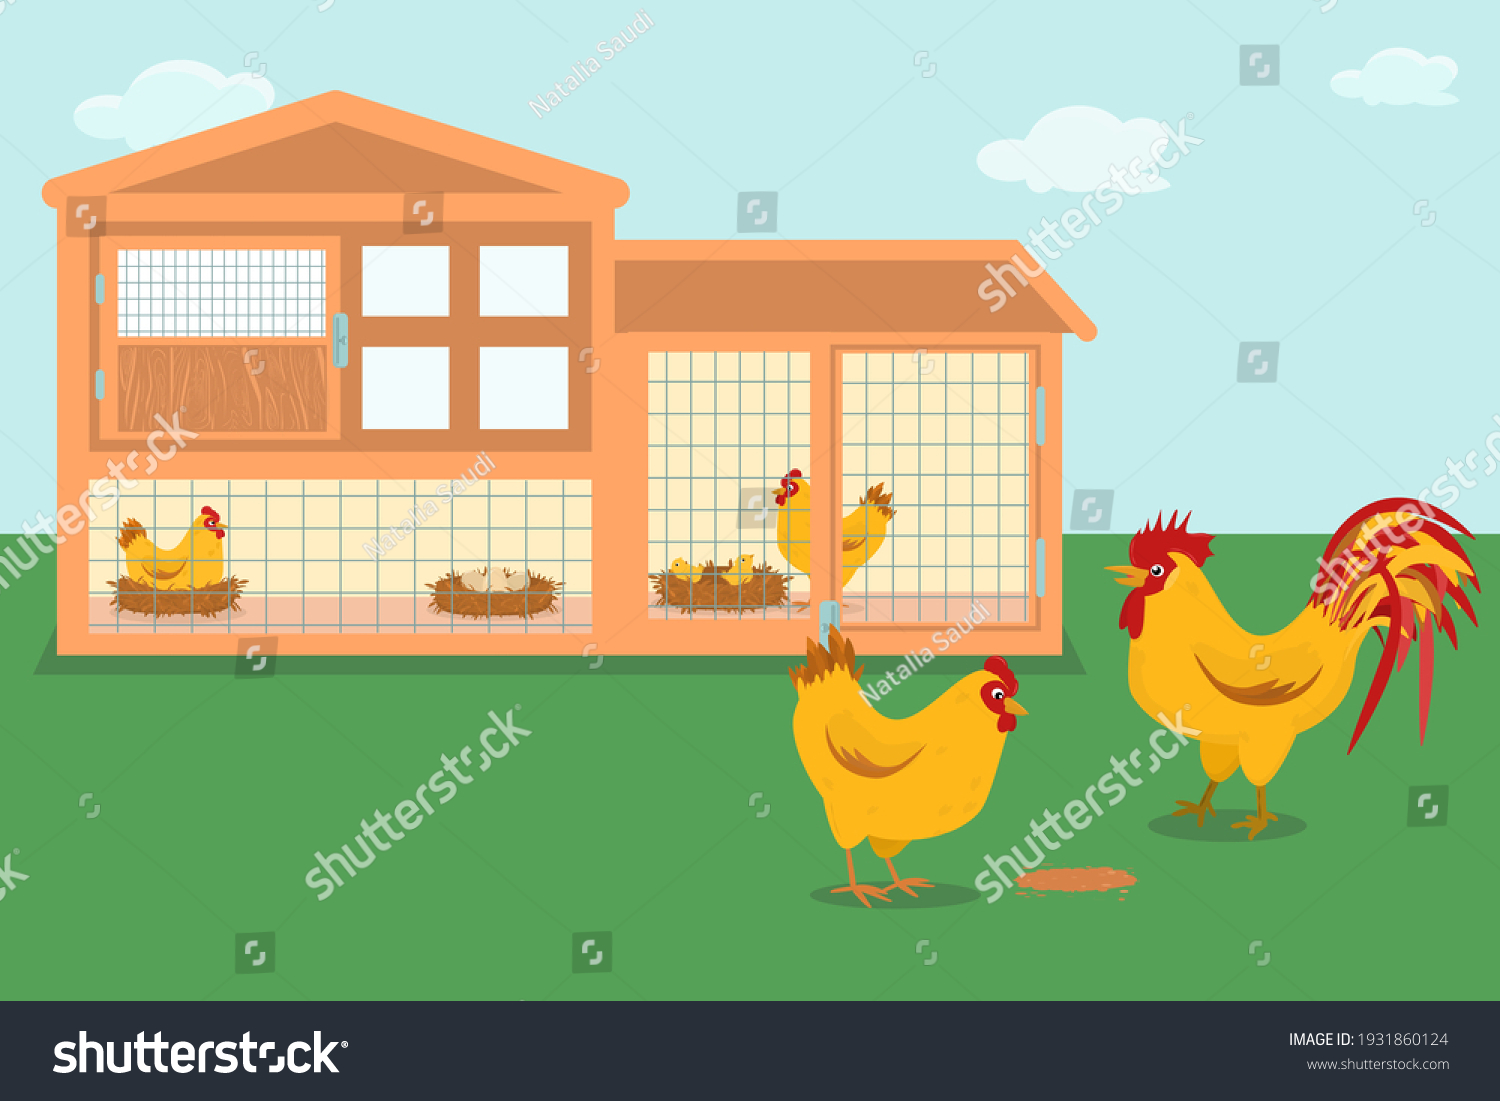 vector illustration of a wooden chicken coop with hens hatching eggs. Isolated on a white background #1931860124